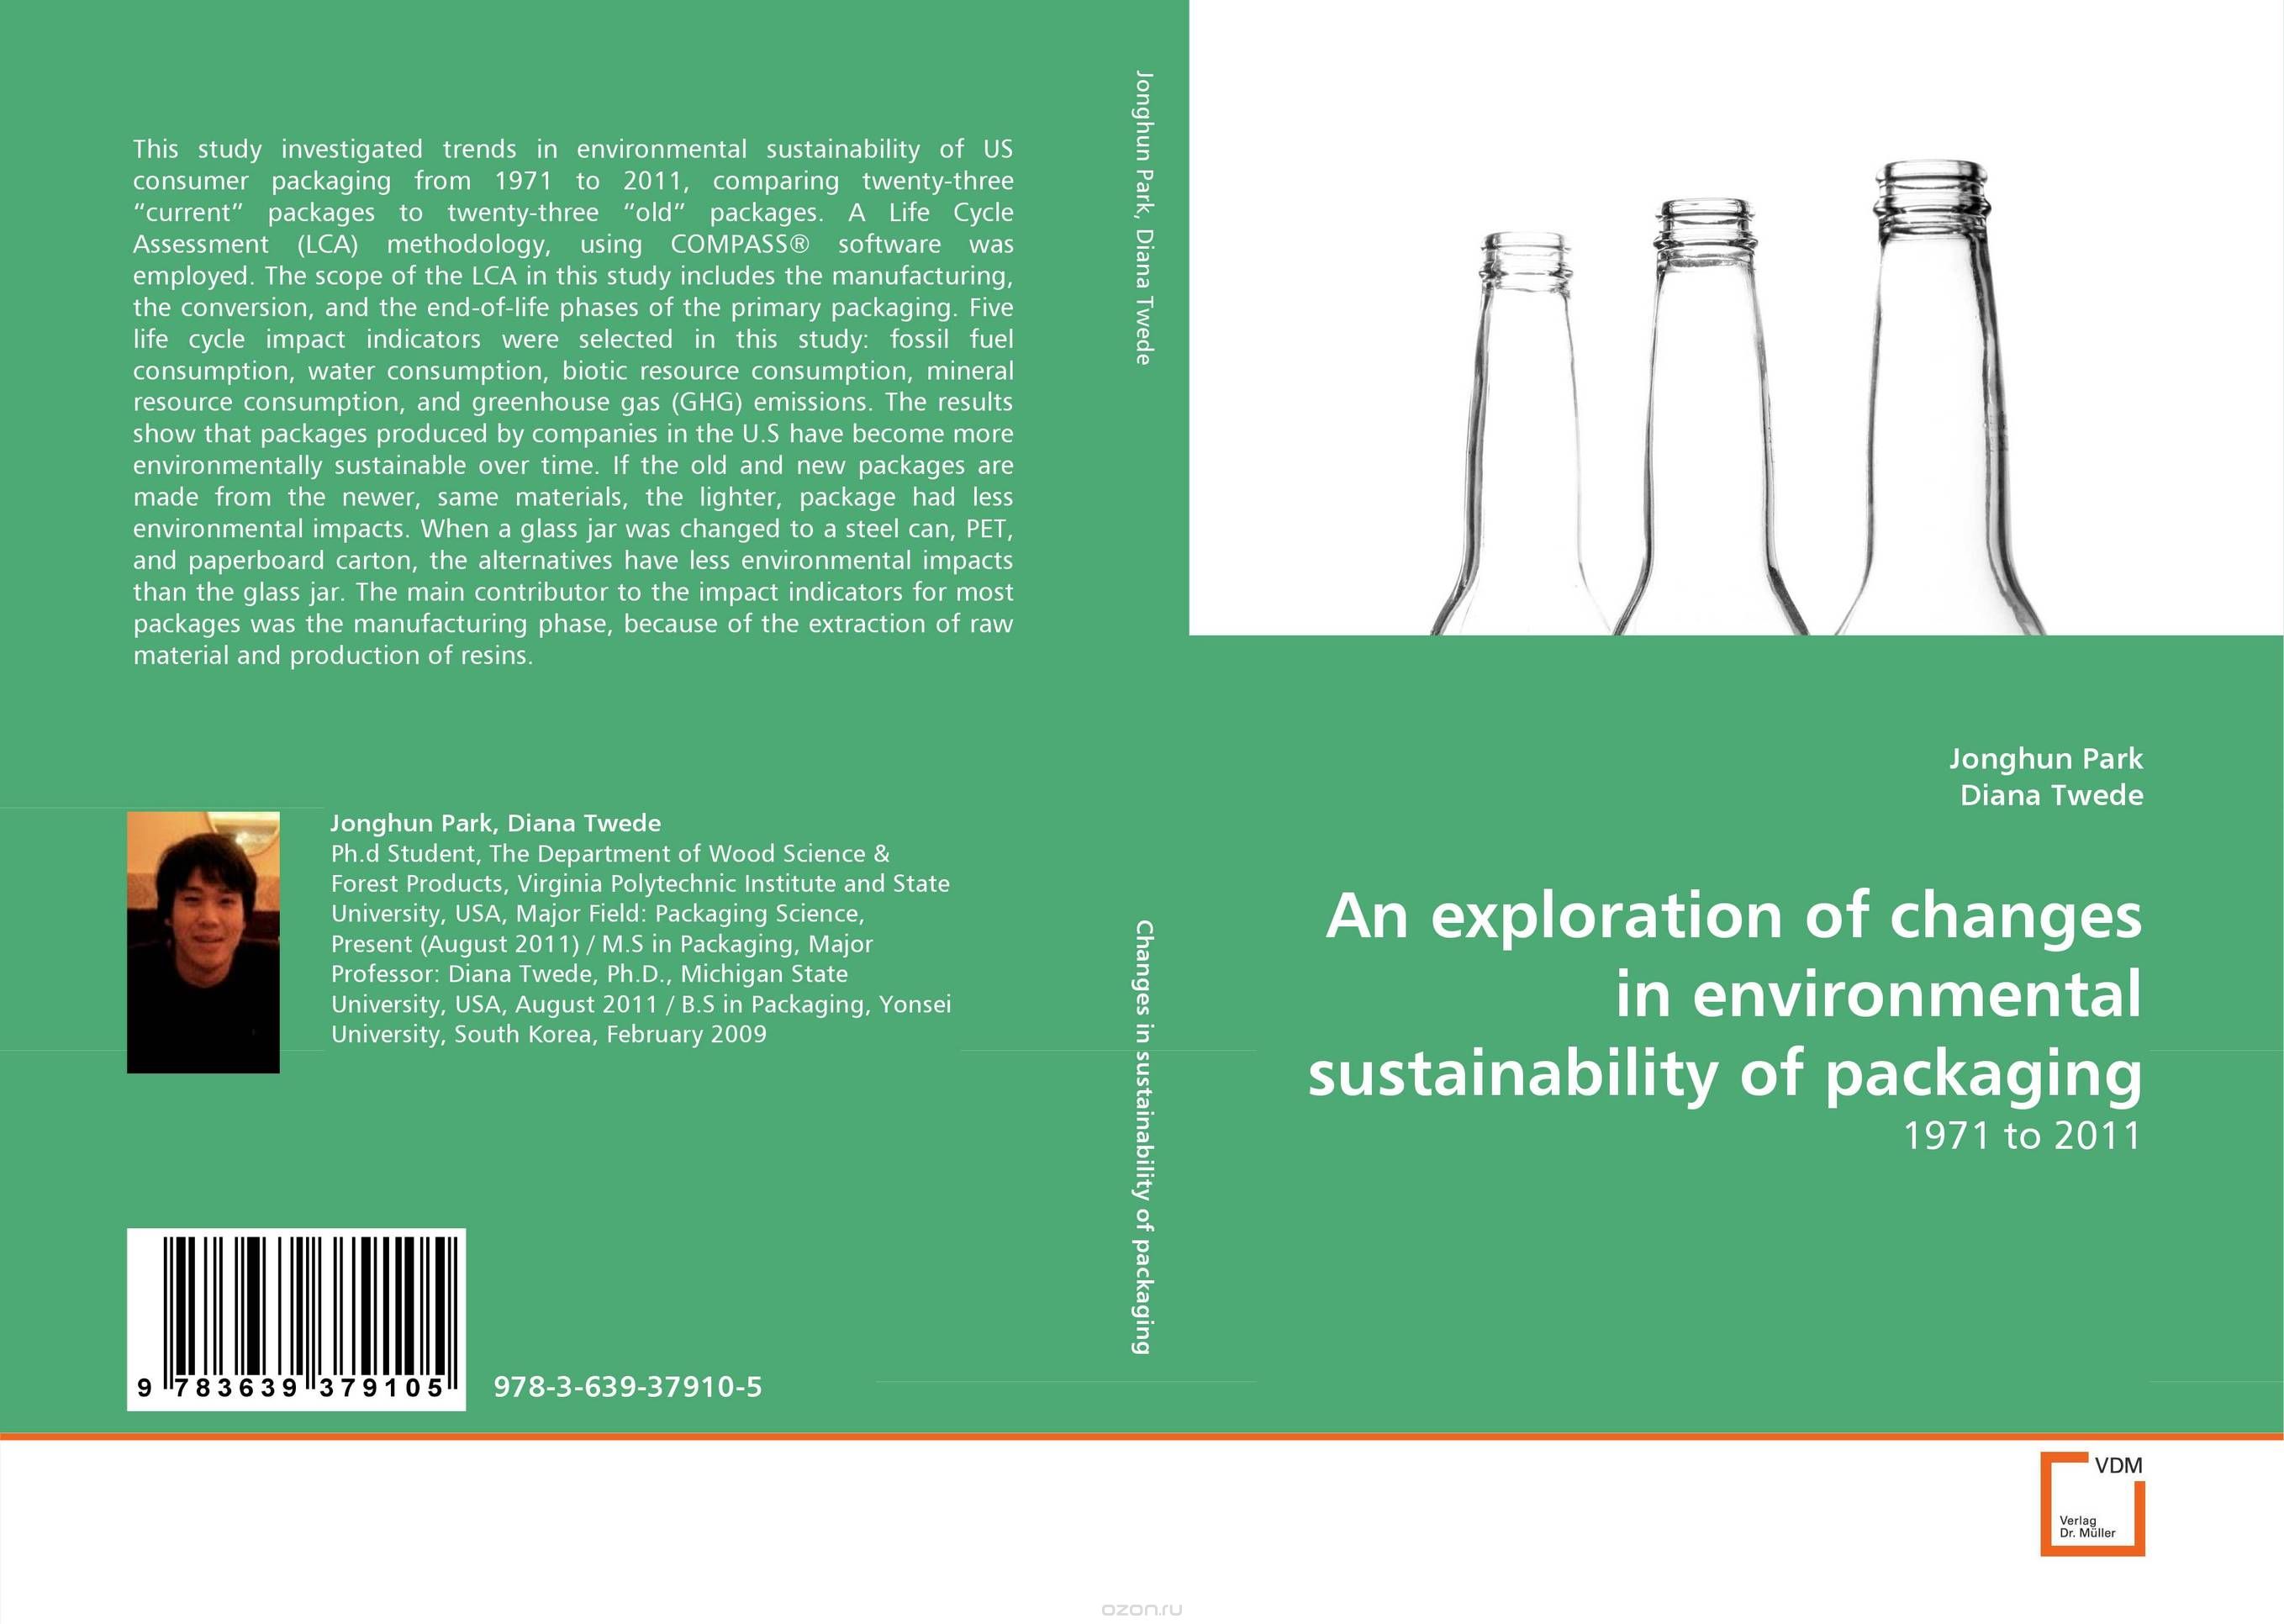 An exploration of changes in environmental sustainability of packaging